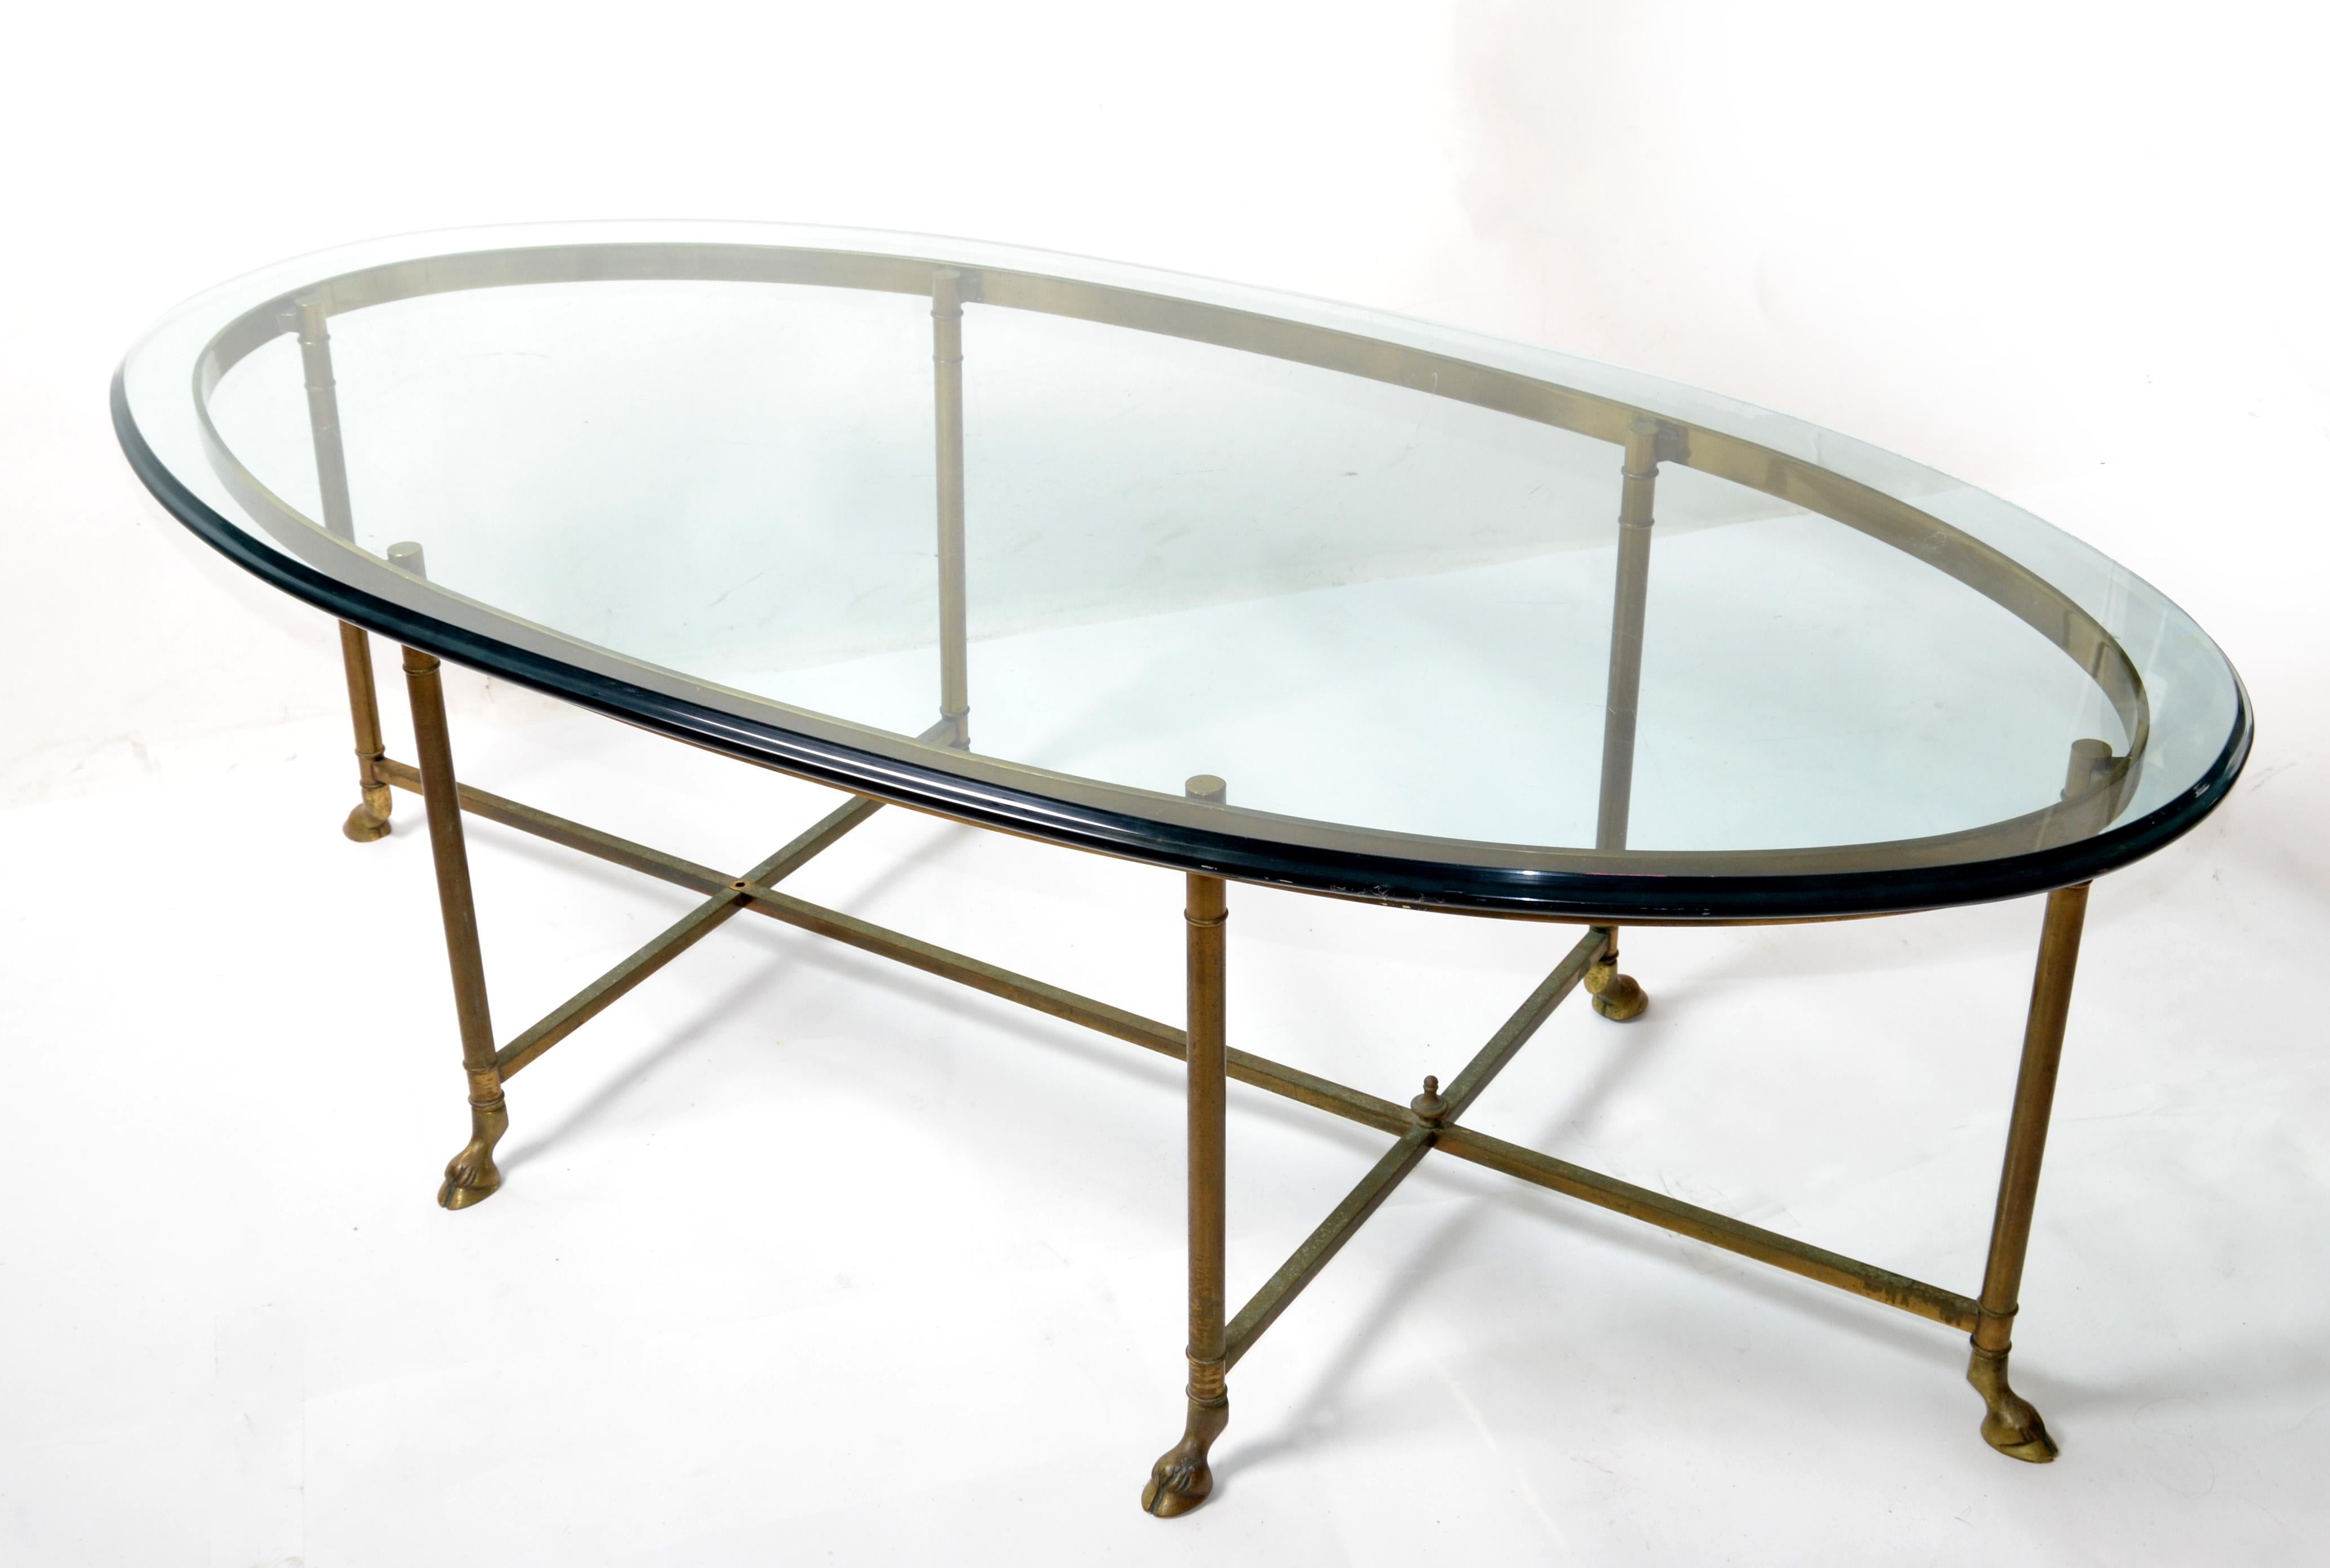 Hollywood Regency Mastercraft brass coffee table with hoof feed & thick classical racetrack glass top.
The base shows a well-aged patina, and the oval heavy glass top is beveled.
This table is craftsmanship pure and is a great addition to any